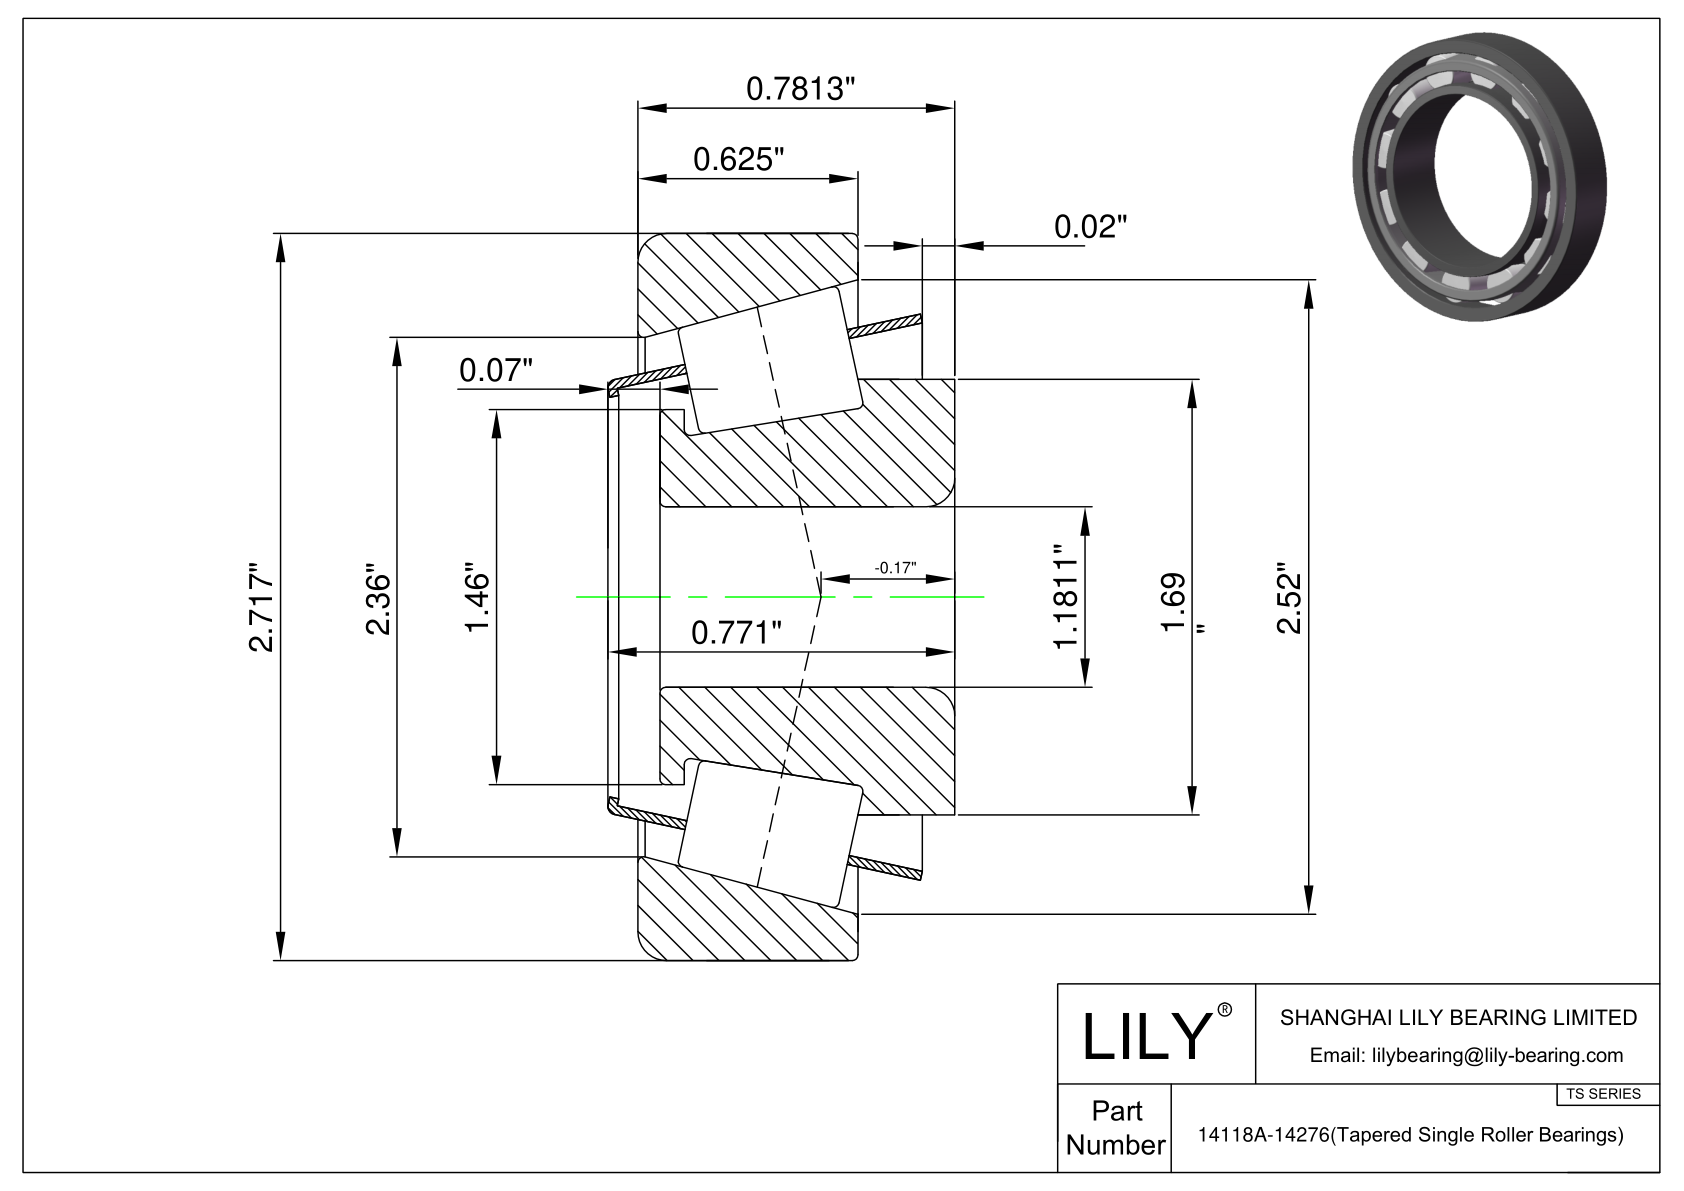 14118A-14276 TS (Tapered Single Roller Bearings) (Imperial) cad drawing